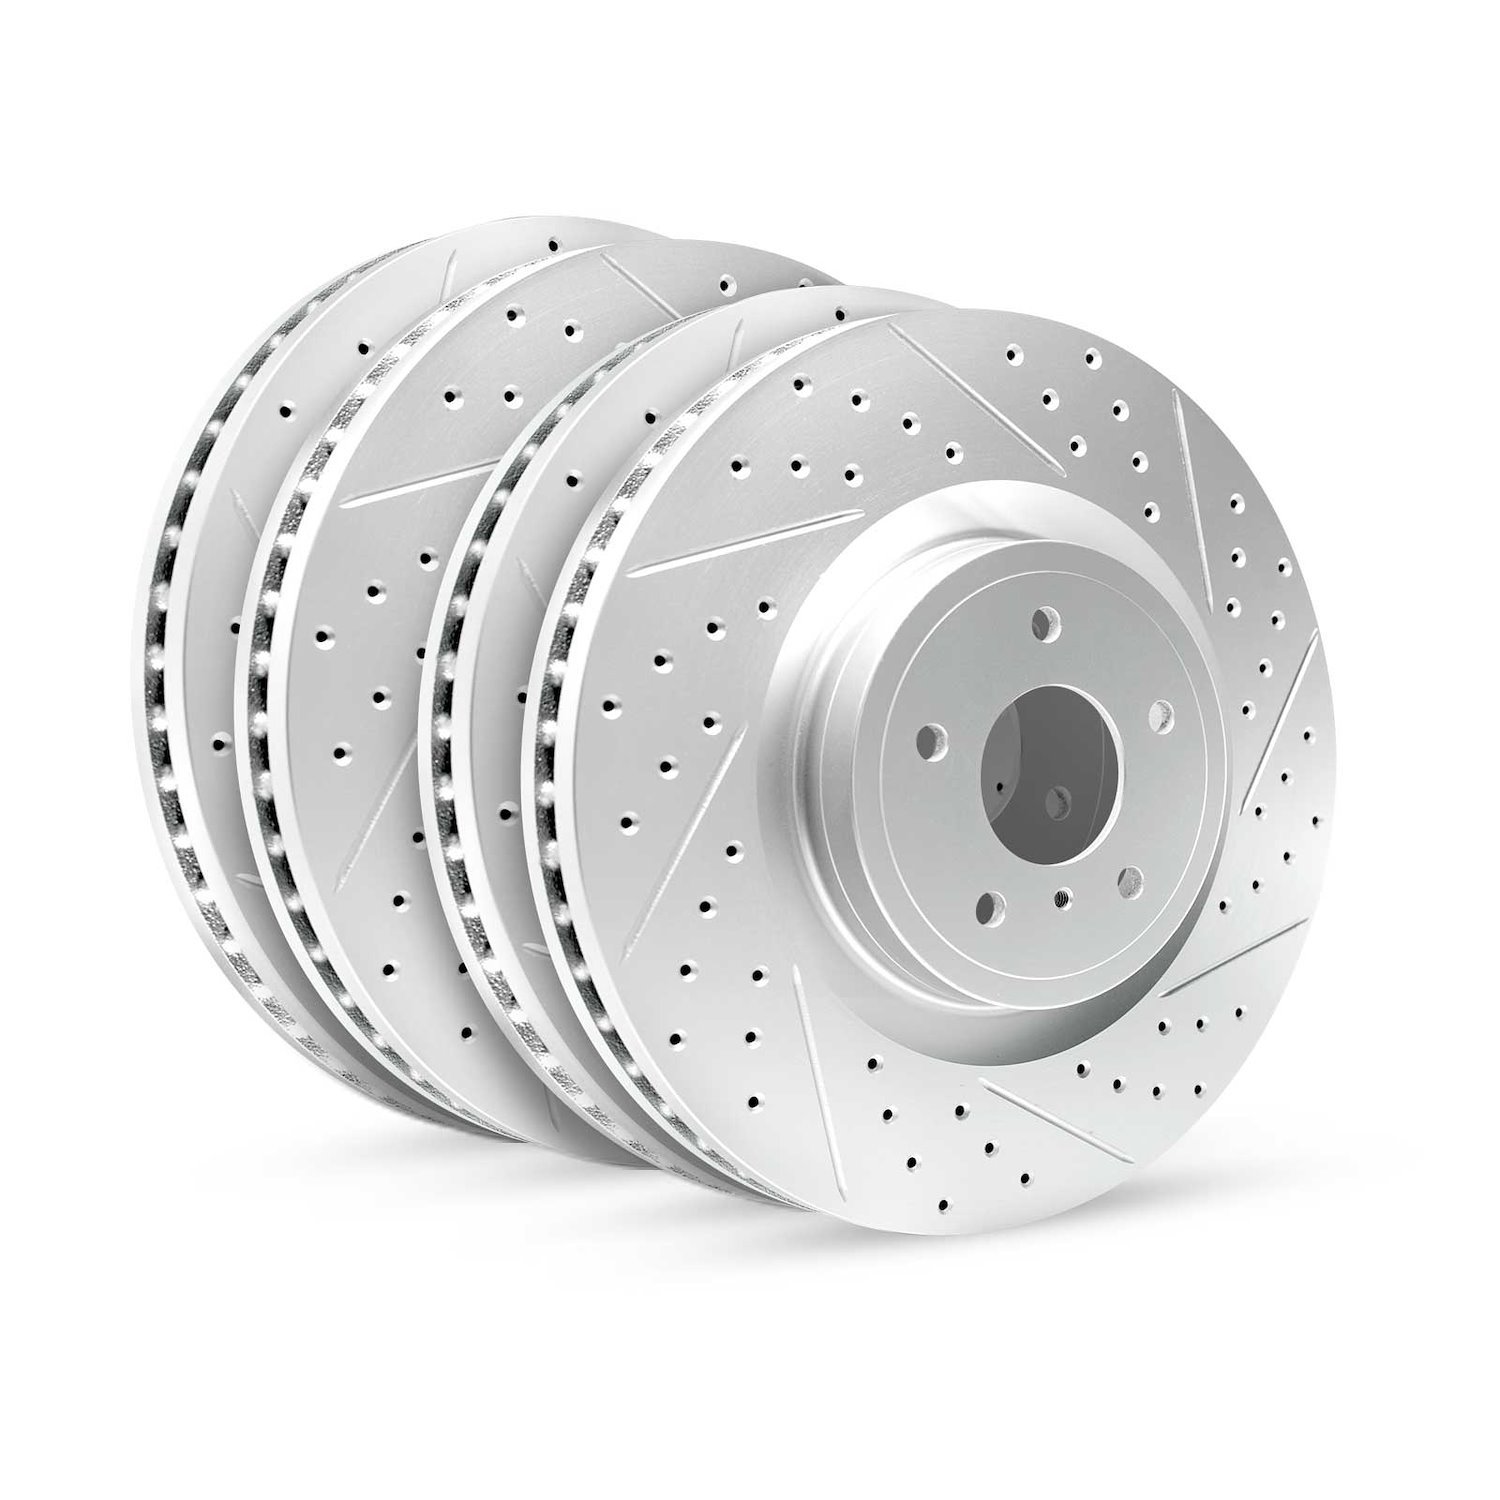 GEO-Carbon Drilled/Slotted Rotors, 2002-2005 Audi/Porsche/Volkswagen, Position: Front/Rear